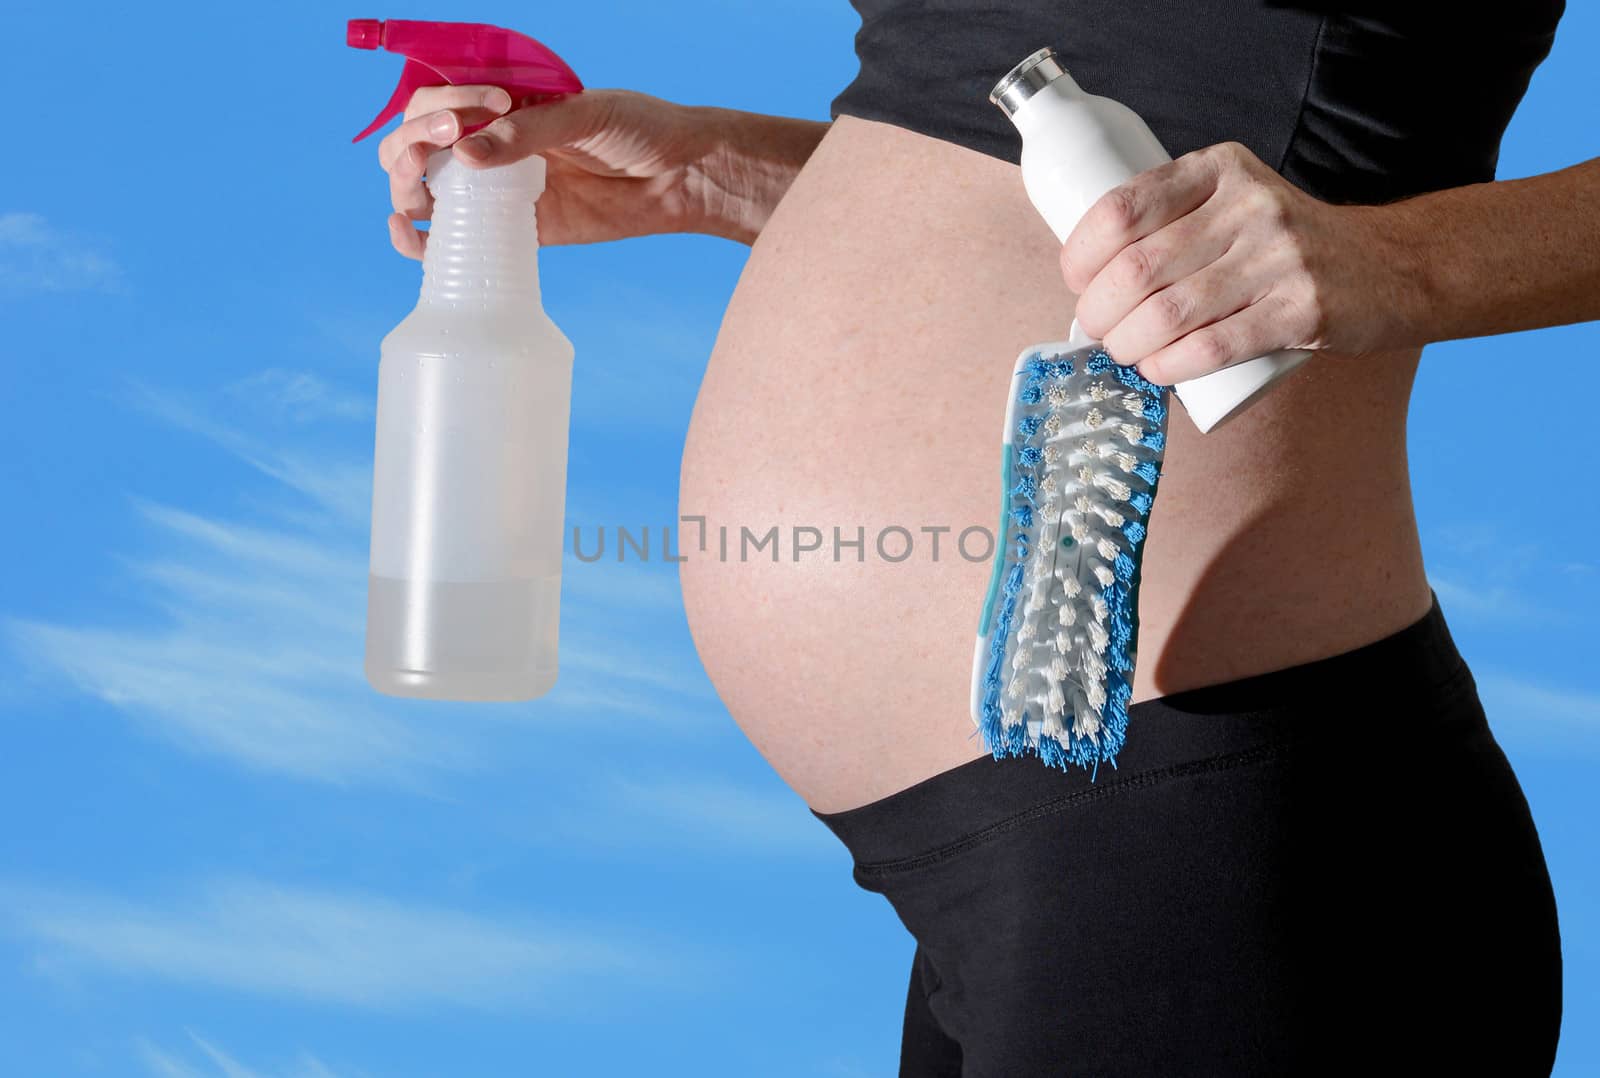 cleaning products and safety while pregnant